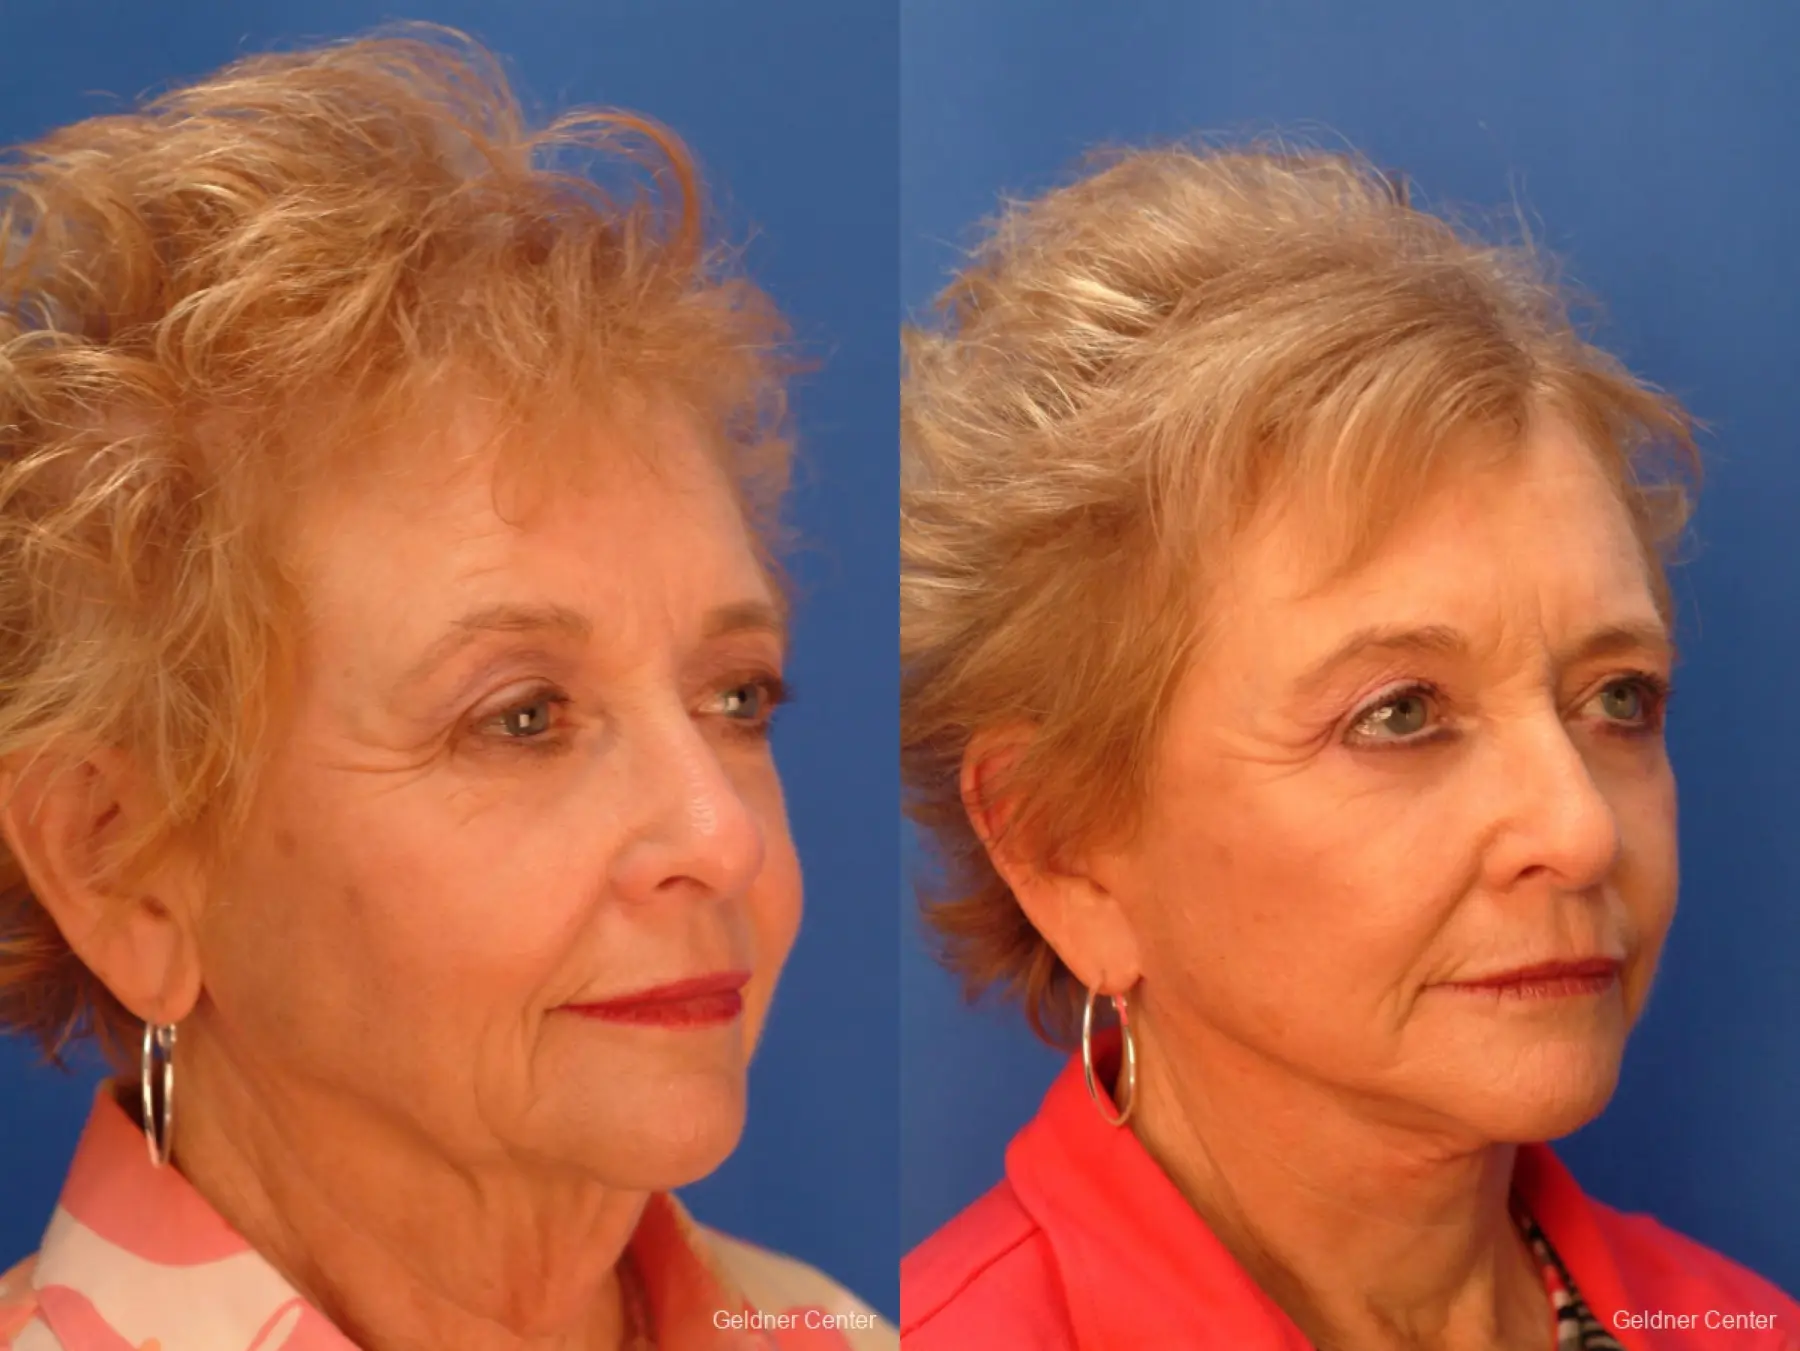 Facelift: Patient 7 - Before and After 3